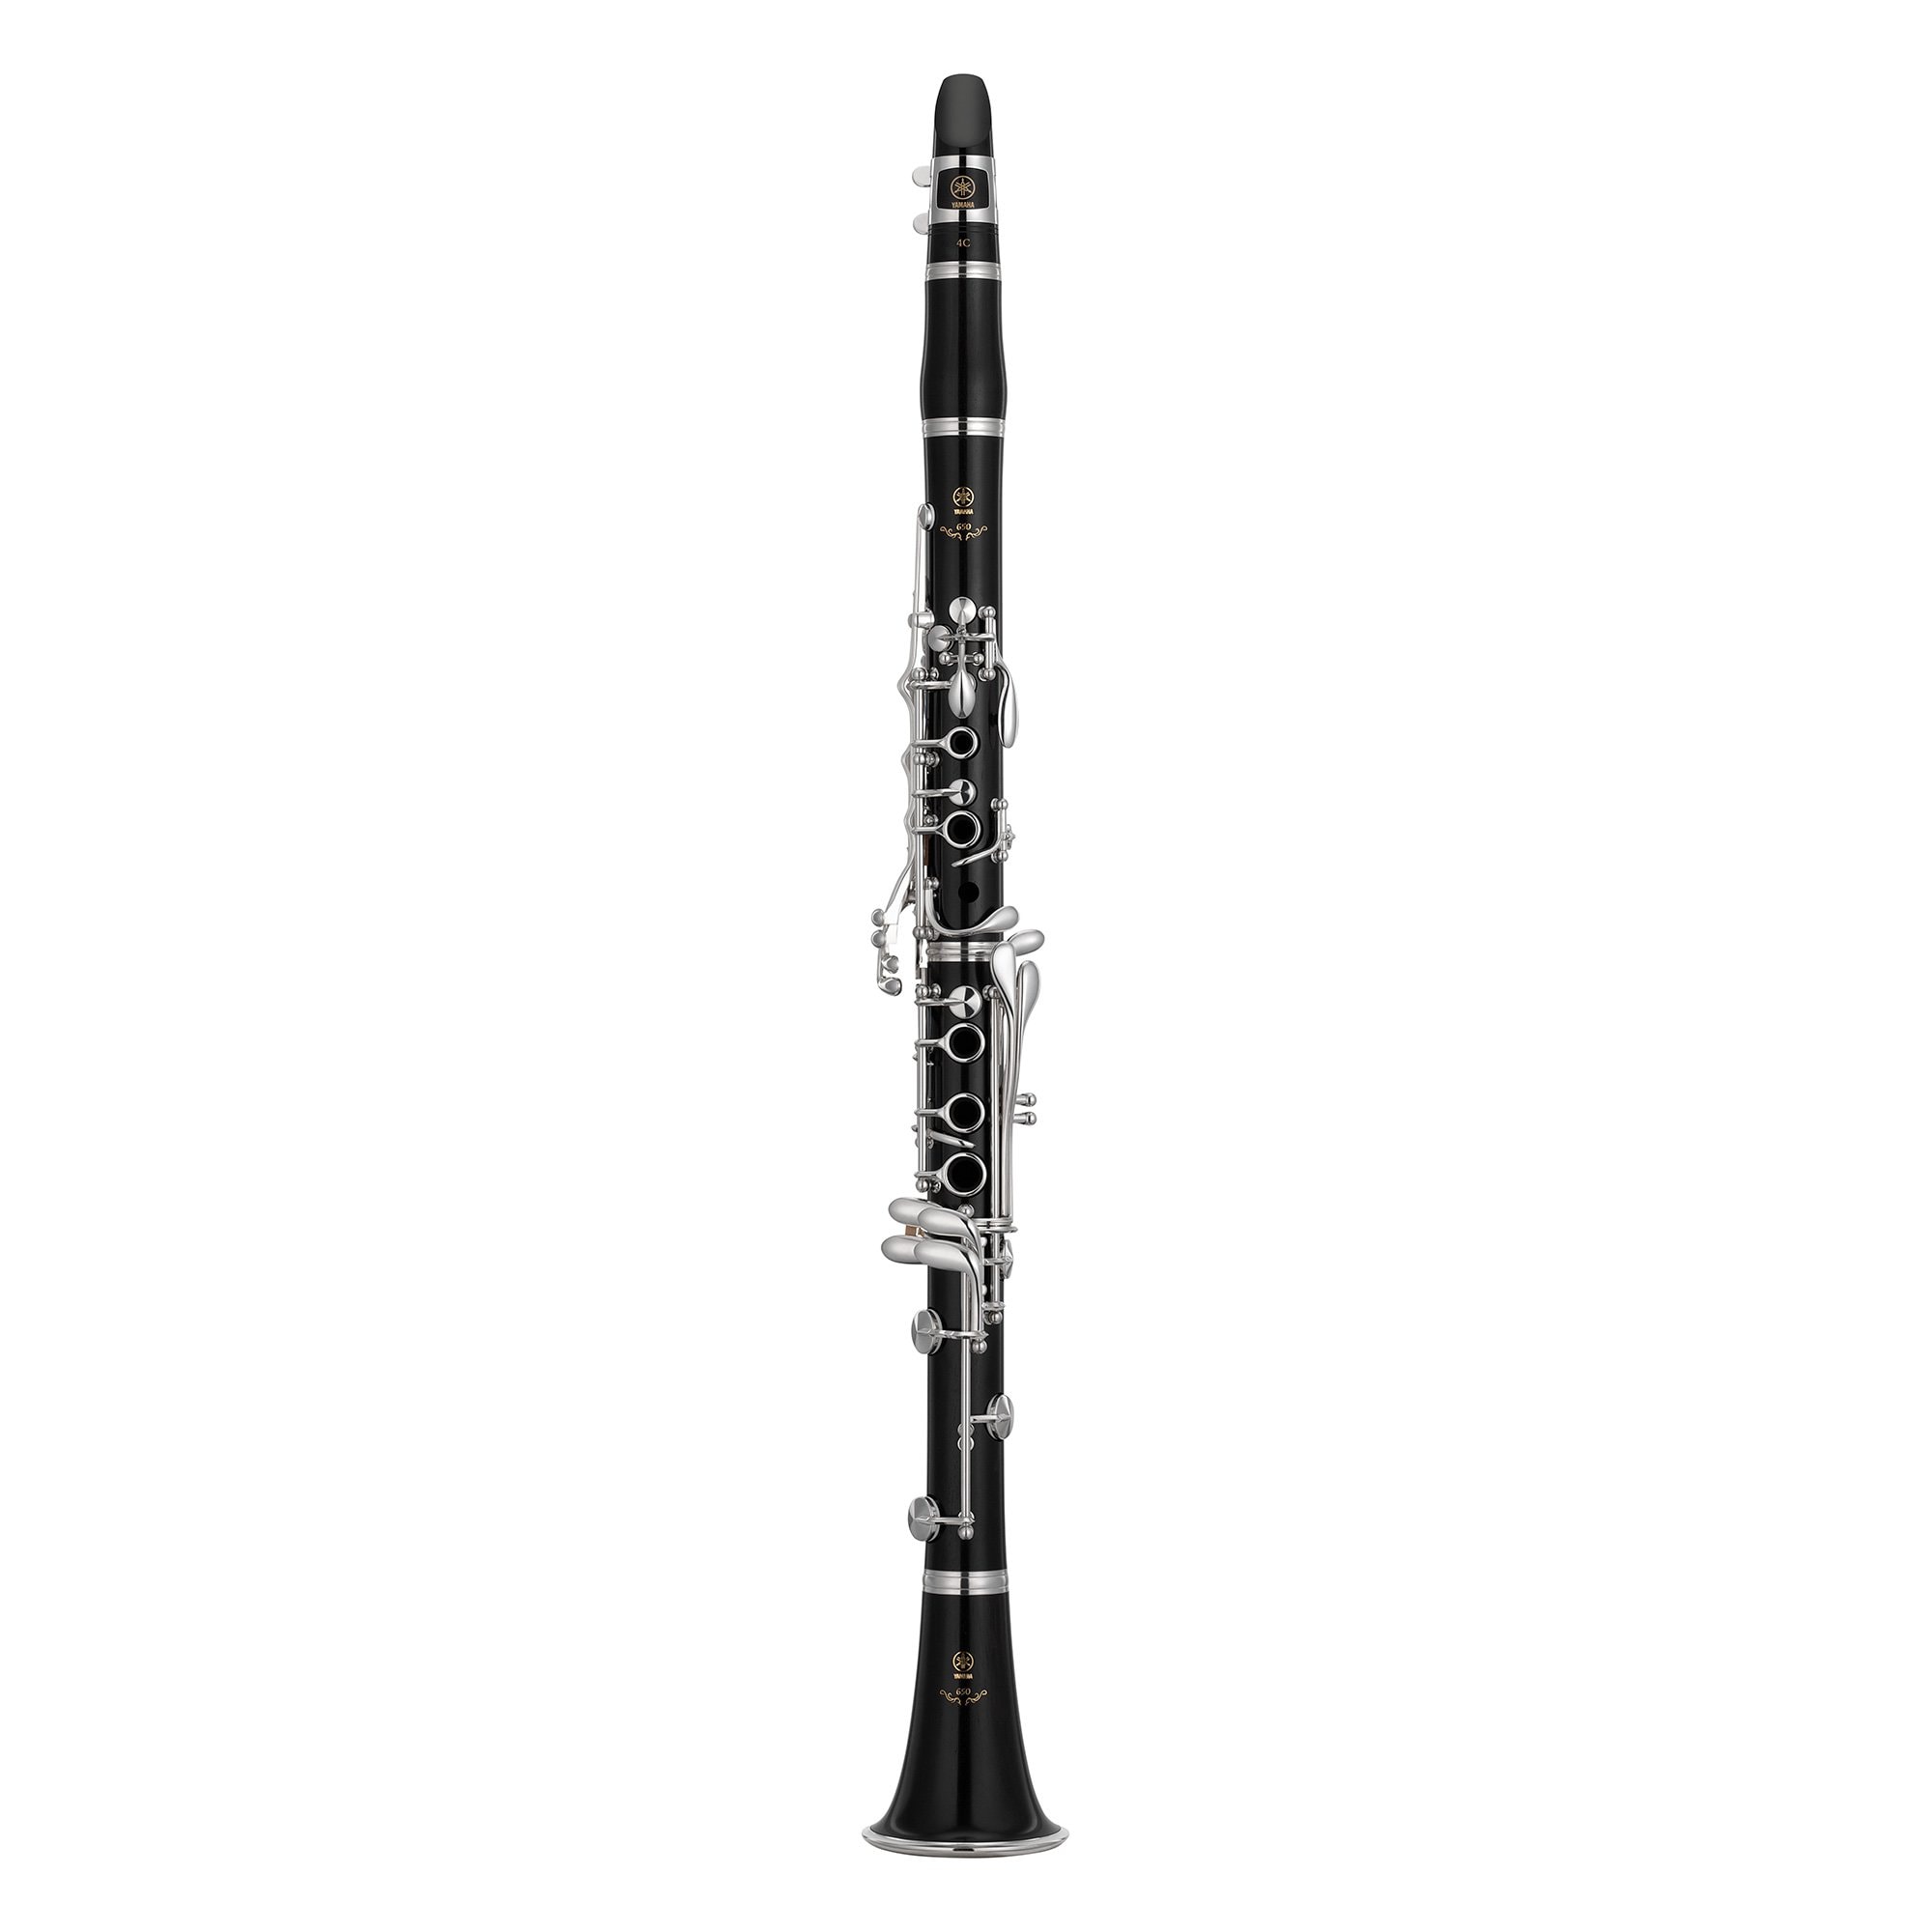 YCL-650 - Overview - Clarinets - Brass & Woodwinds - Musical 